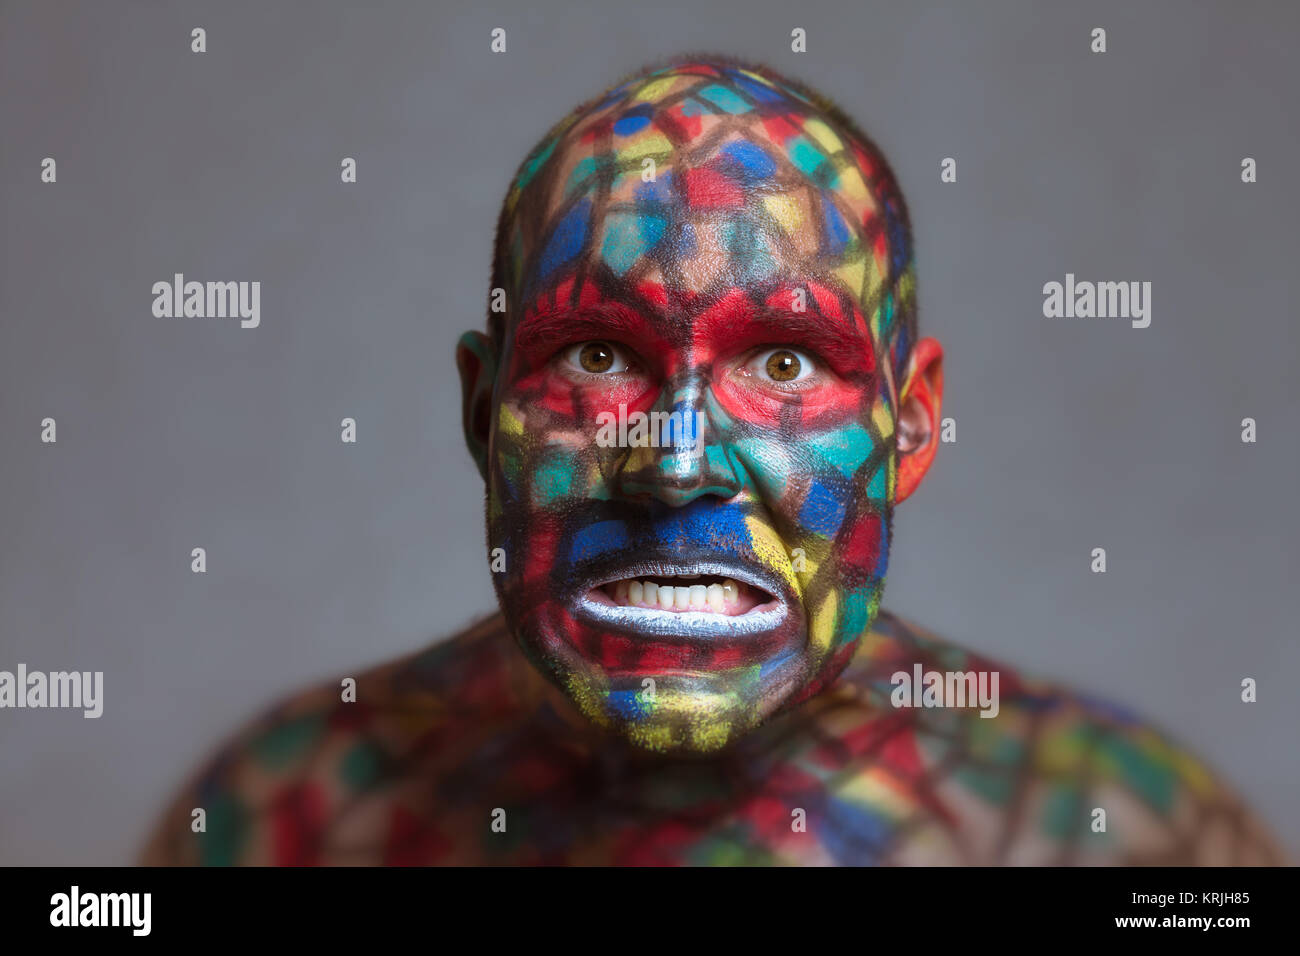 Furious villain colorful face looking at you Stock Photo